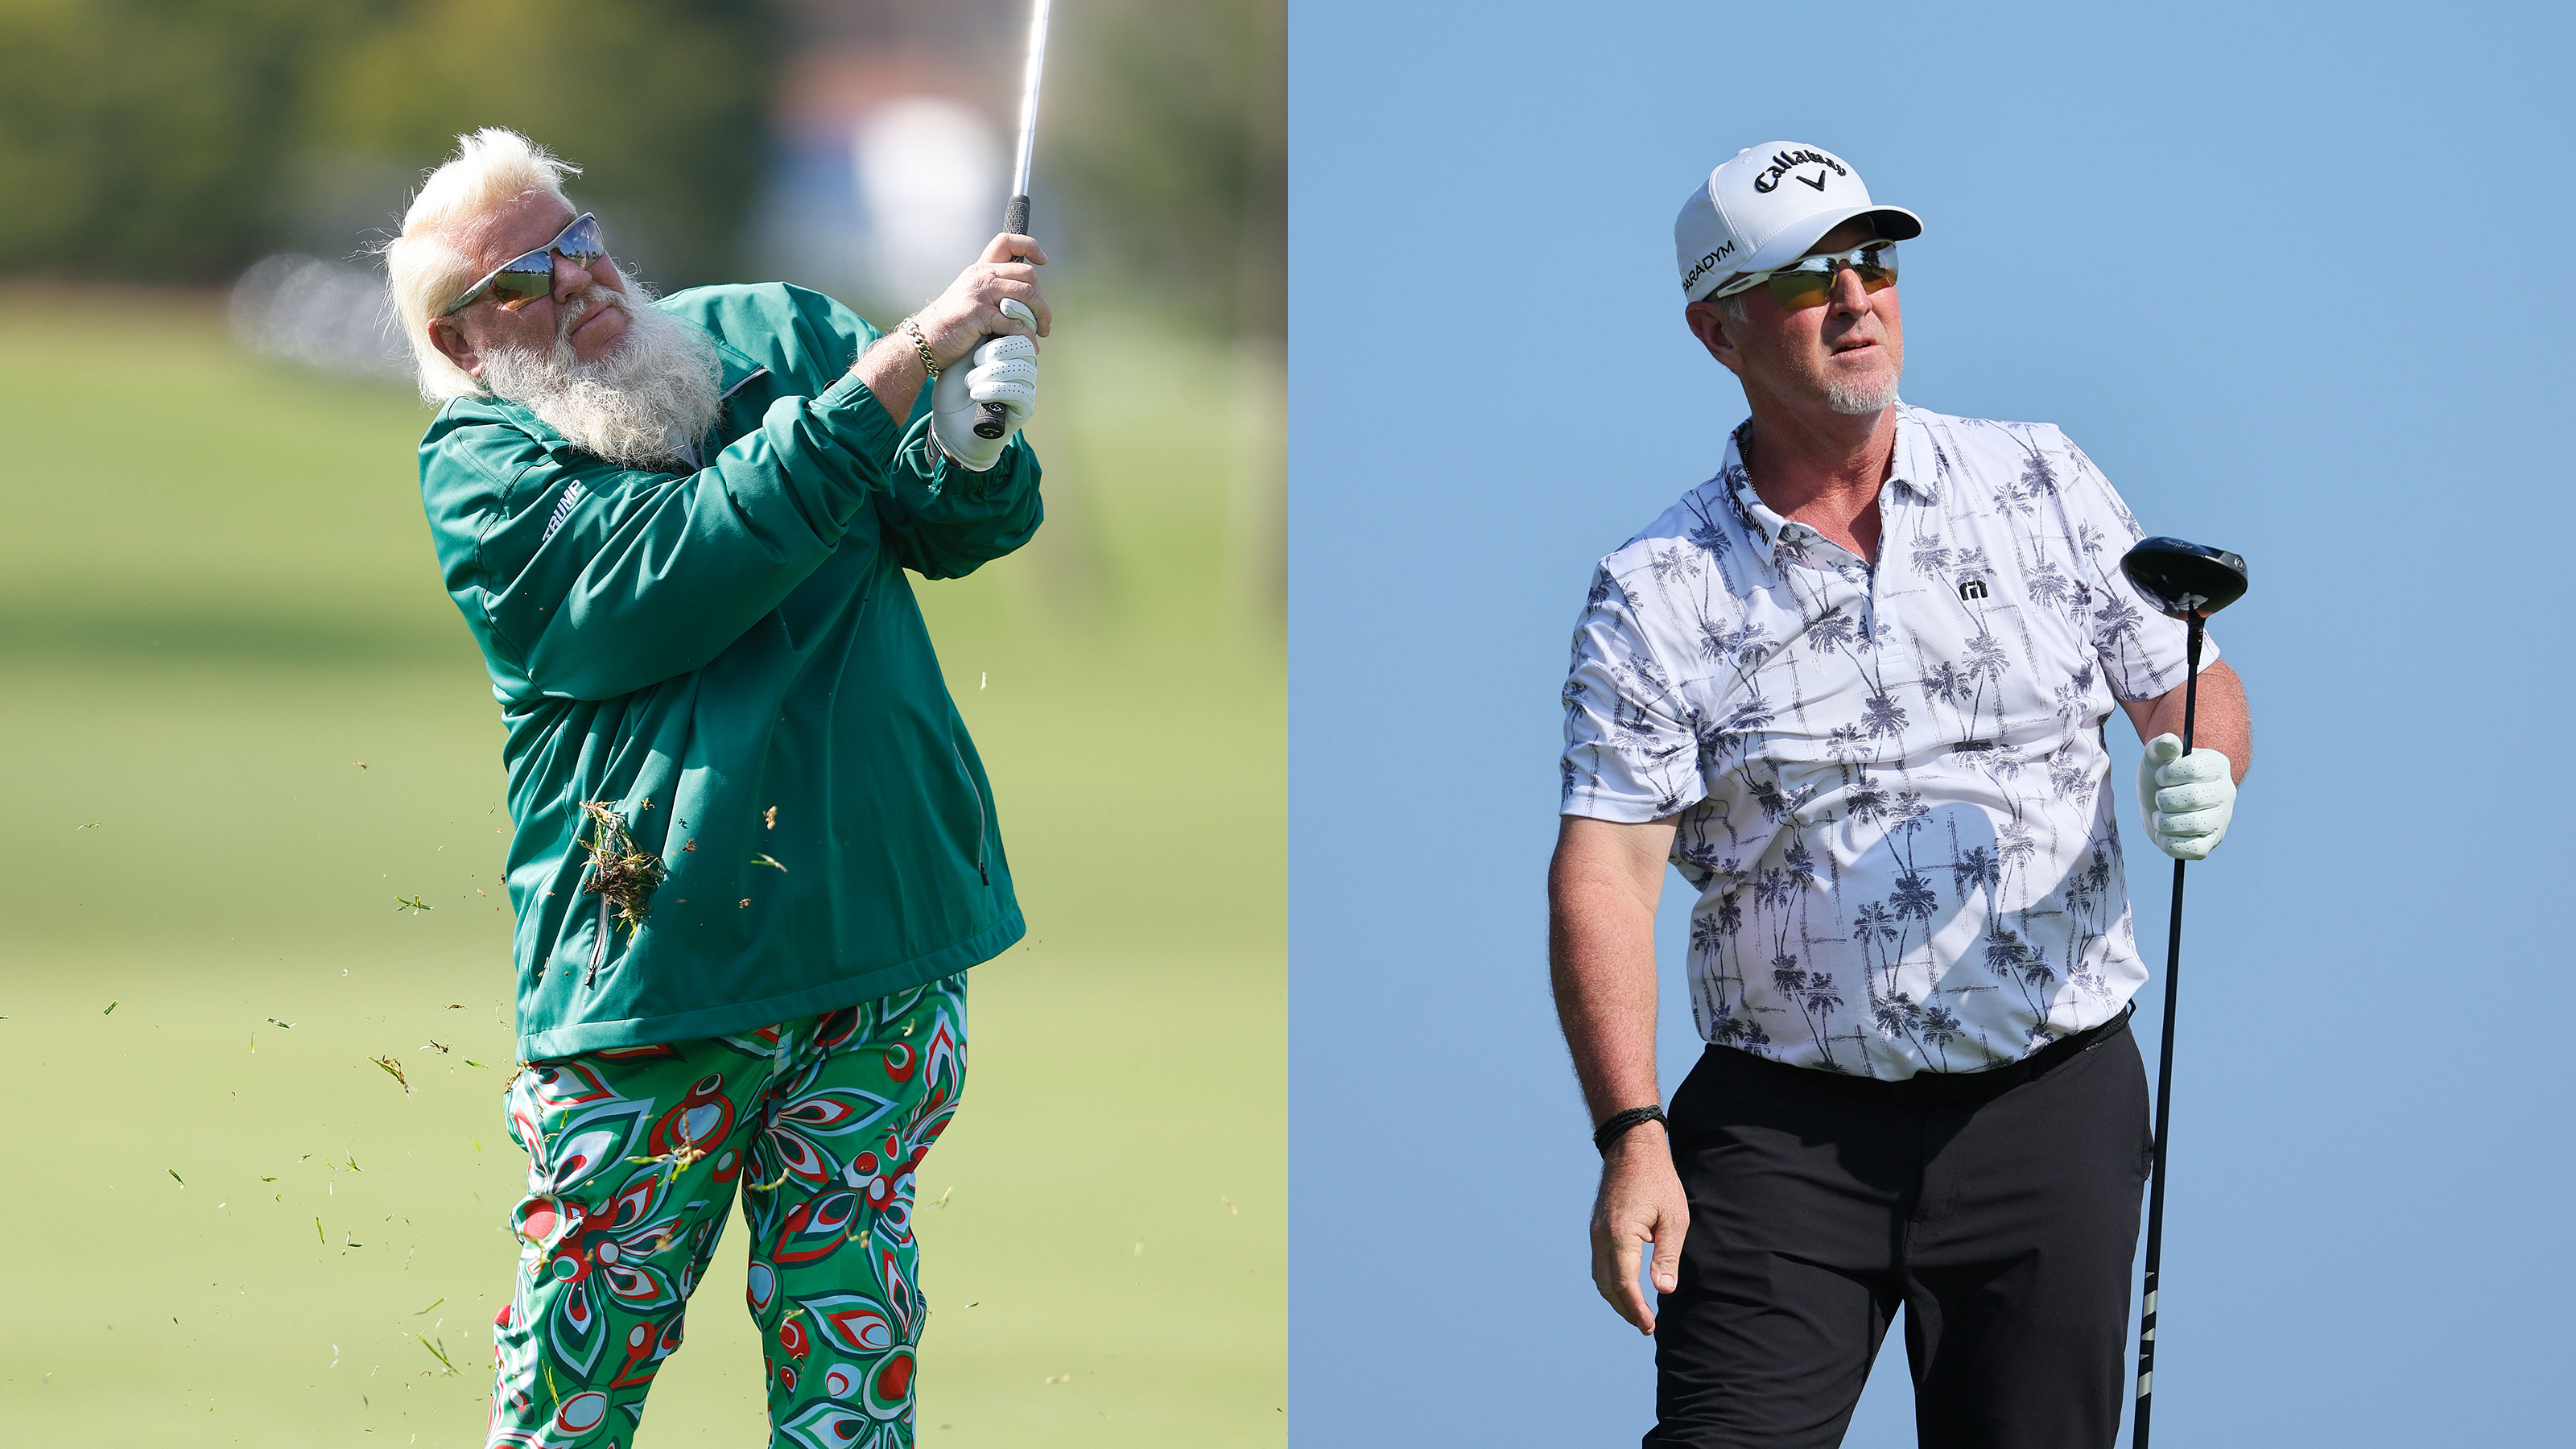 SportsCenter - Per usual, John Daly is rocking some amazing pants at The  Open.